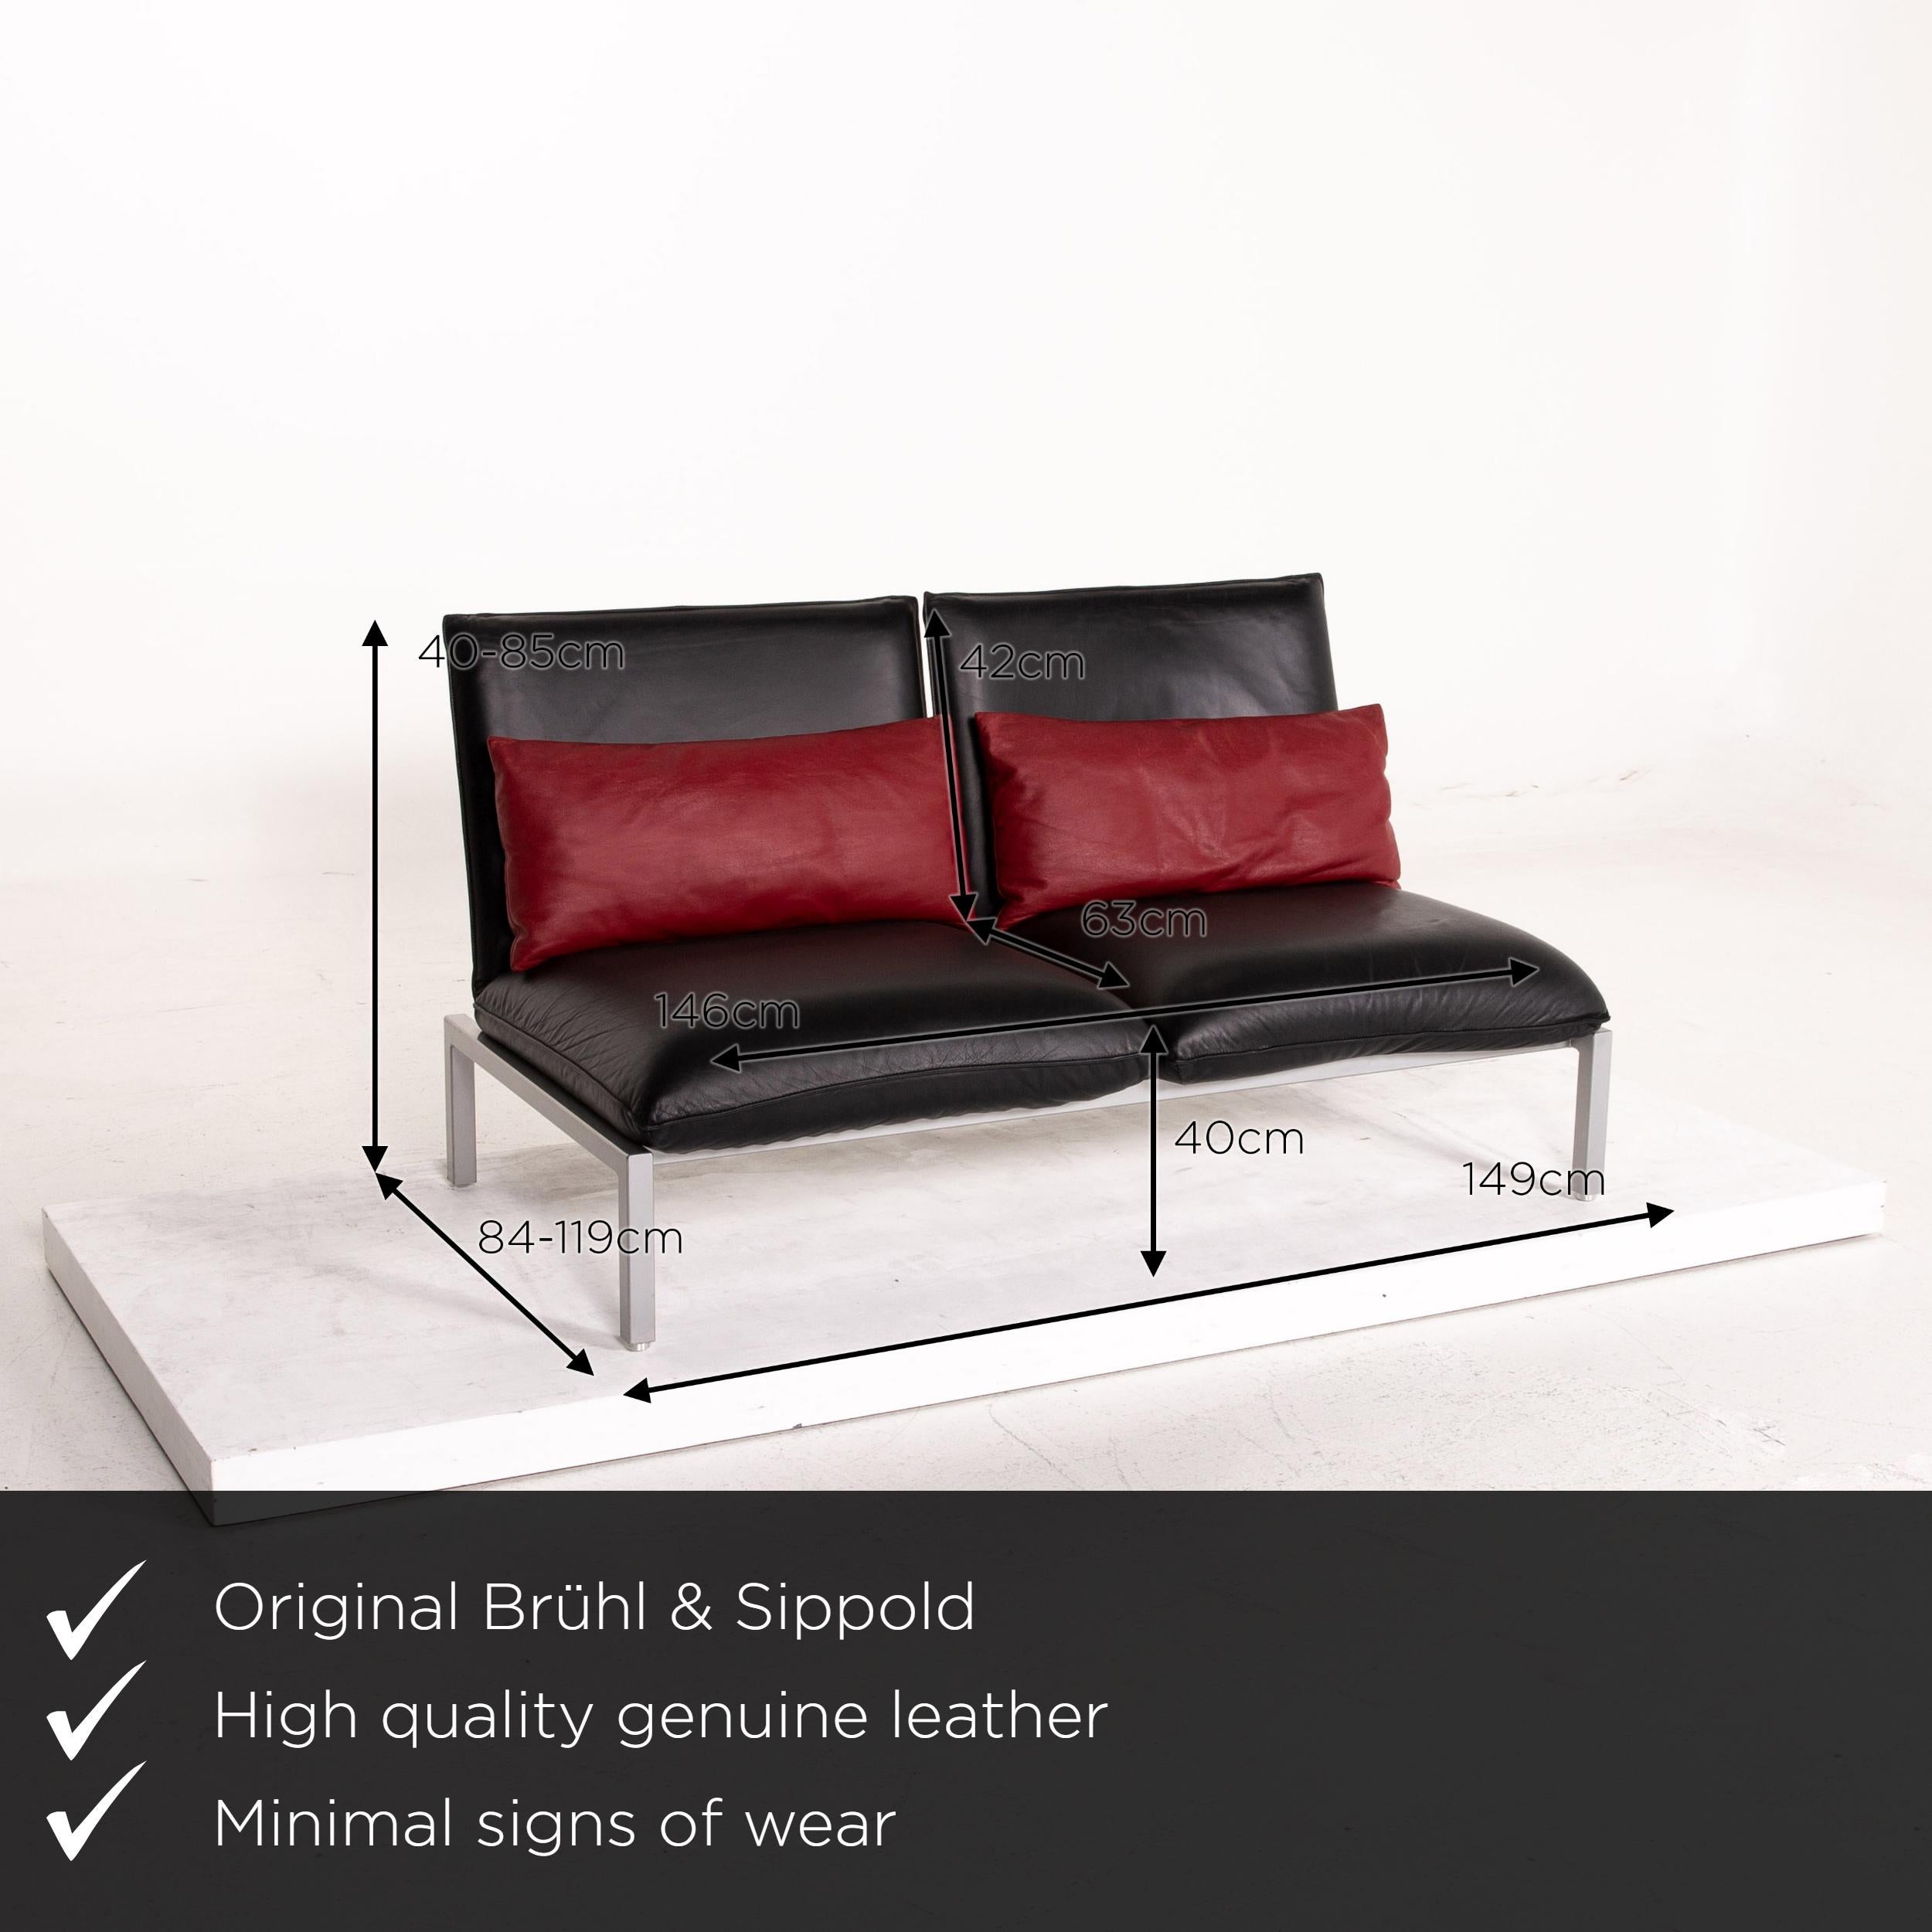 We present to you a Brühl & Sippold Roro leather sofa black two-seat function relax function couch.
  
 

 Product measurements in centimeters:
 

Depth 84
Width 149
Height 40
Seat height 40
Seat depth 63
Seat width 146
Back height